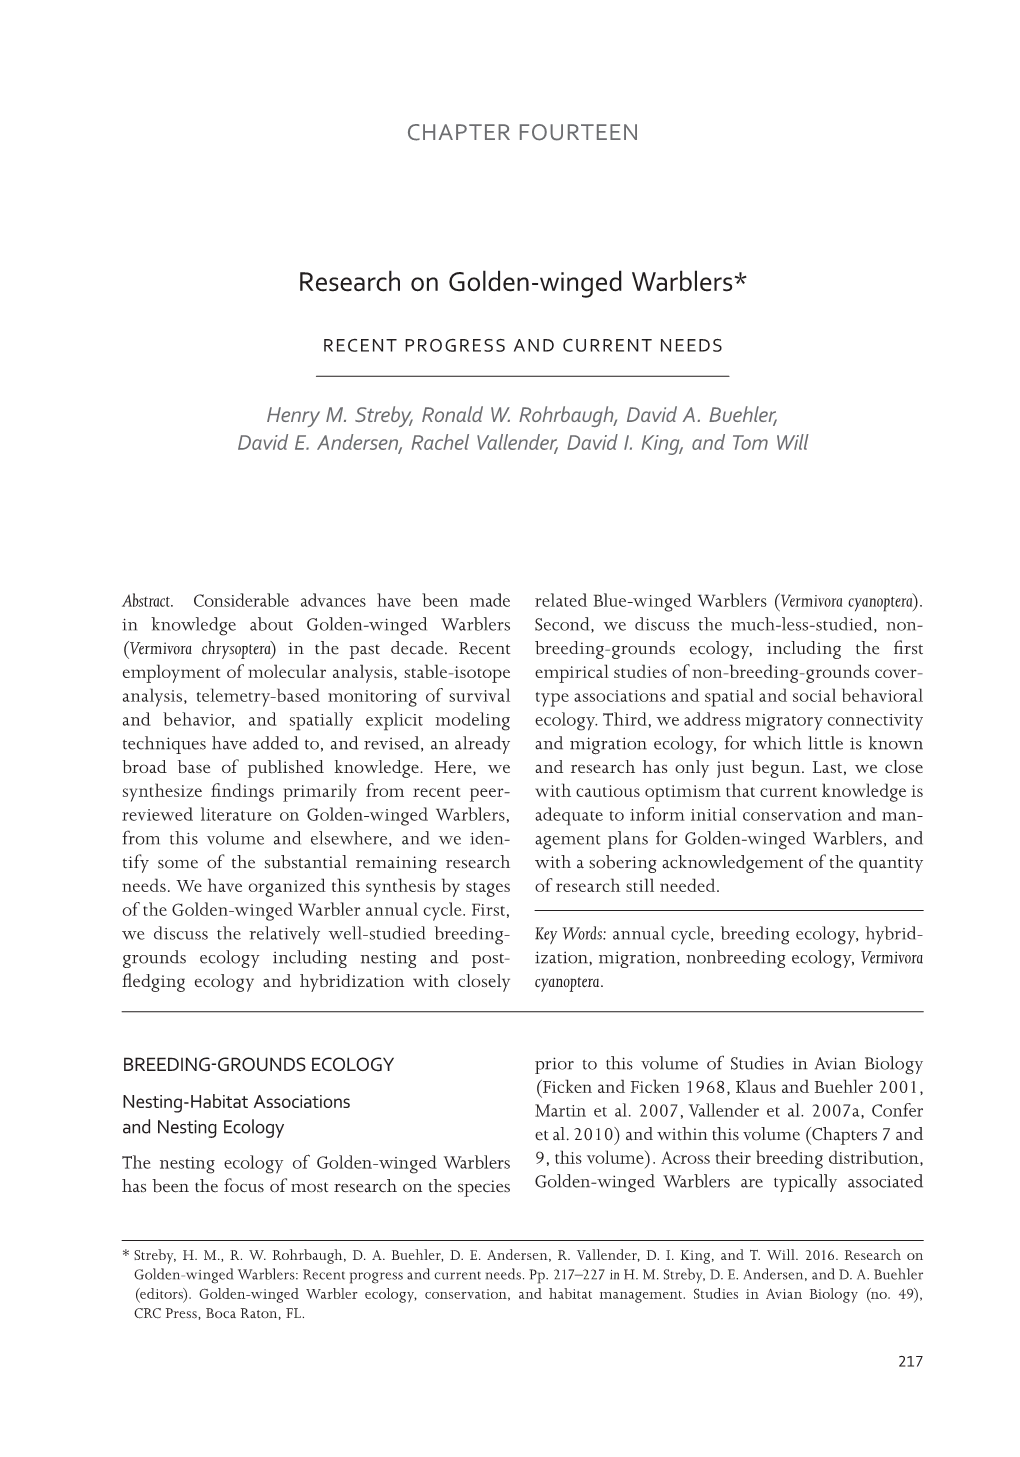 Research on Golden-Winged Warblers: Recent Progress and Current Needs